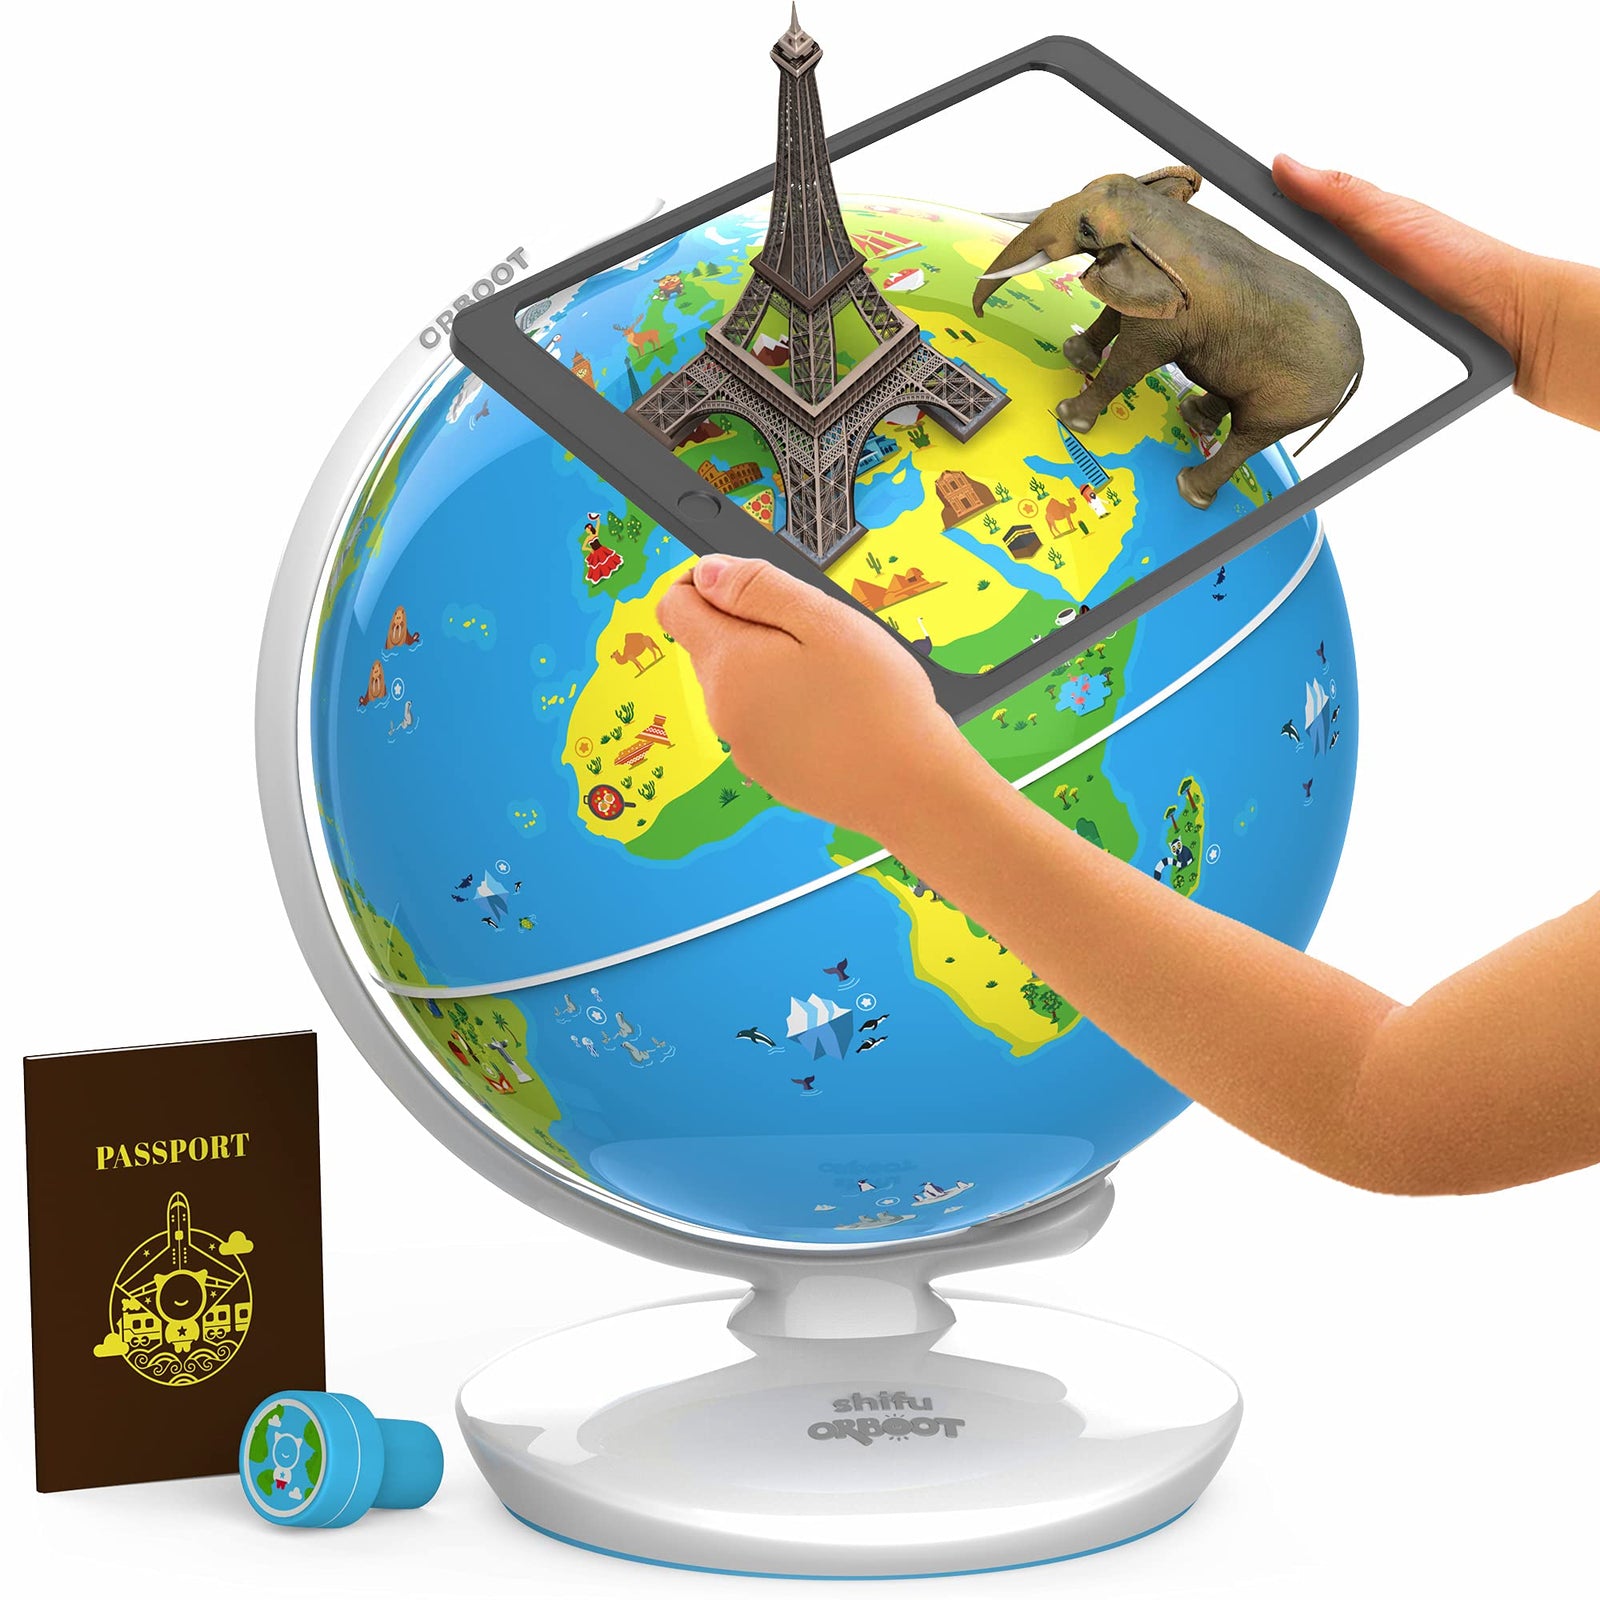 Orboot Earth by PlayShifu (App Based): Interactive AR Globe For Kids, STEM Toy Ages 4-10, Educational Gift For Boys & Girls (No Borders, No Names On Globe)